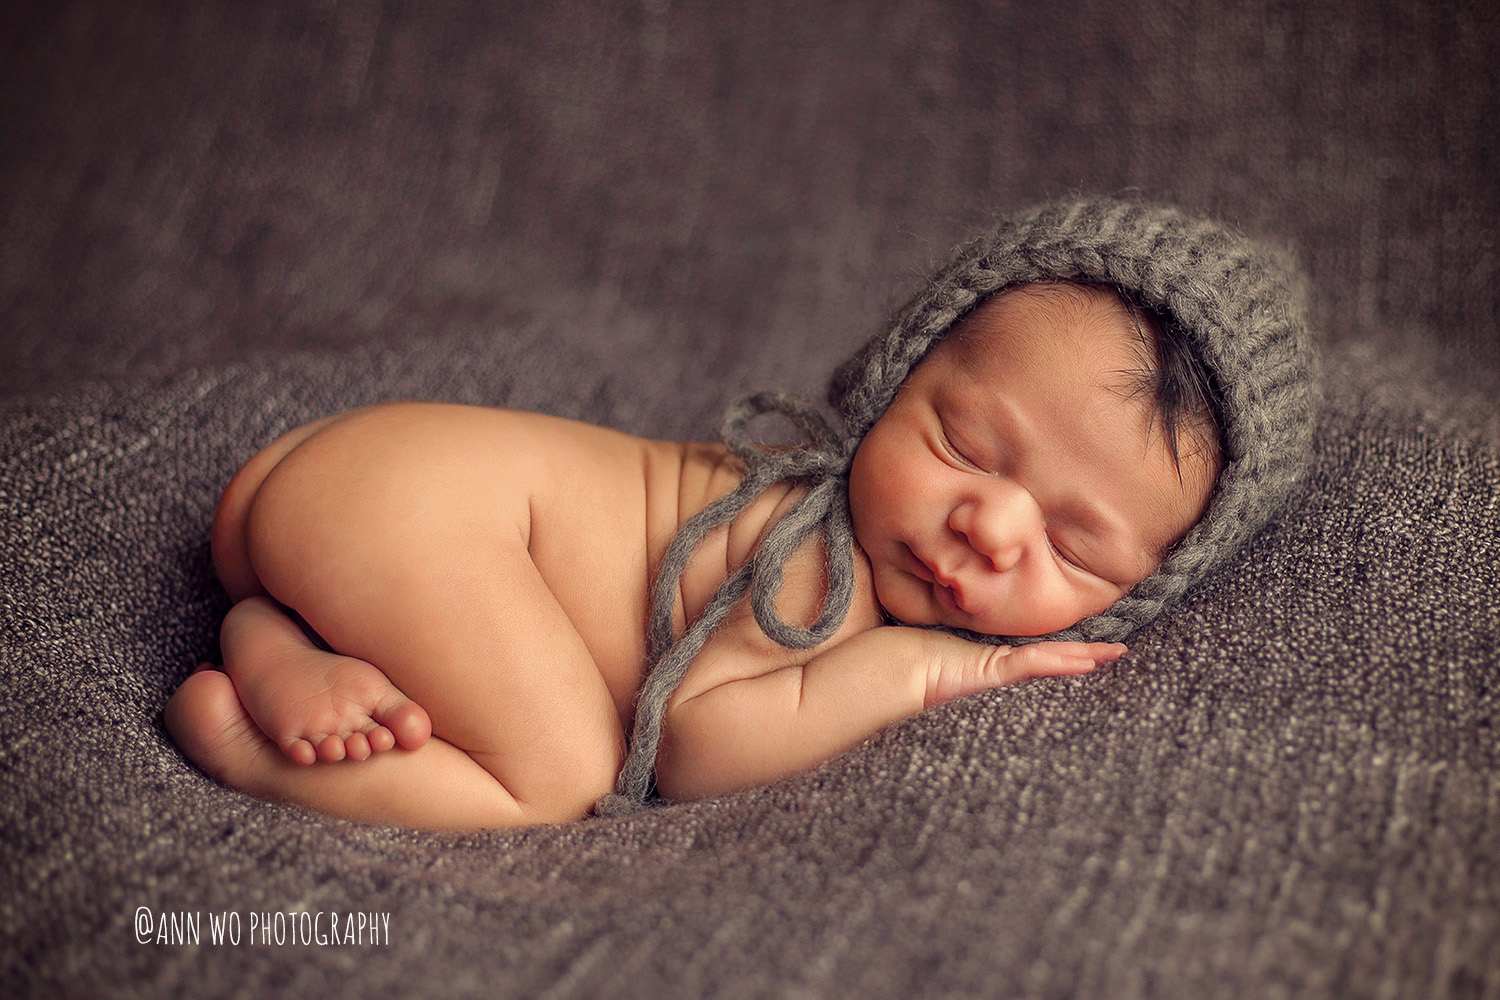 ann wo photography specialising  in newborns